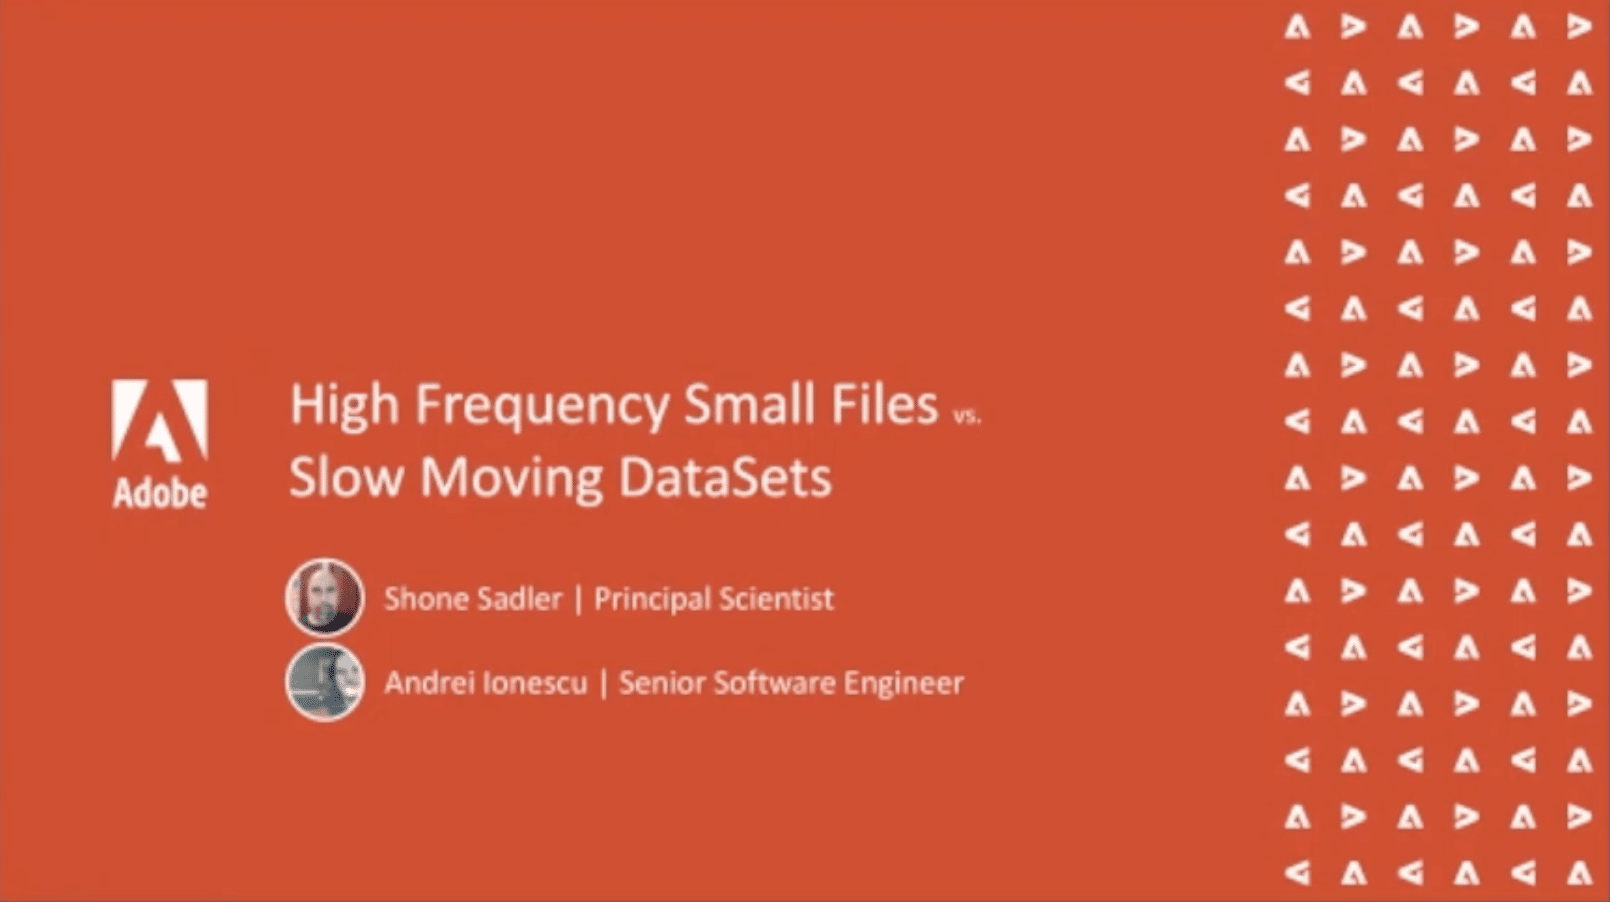 High Frequency Small Files vs. Slow Moving Datasets